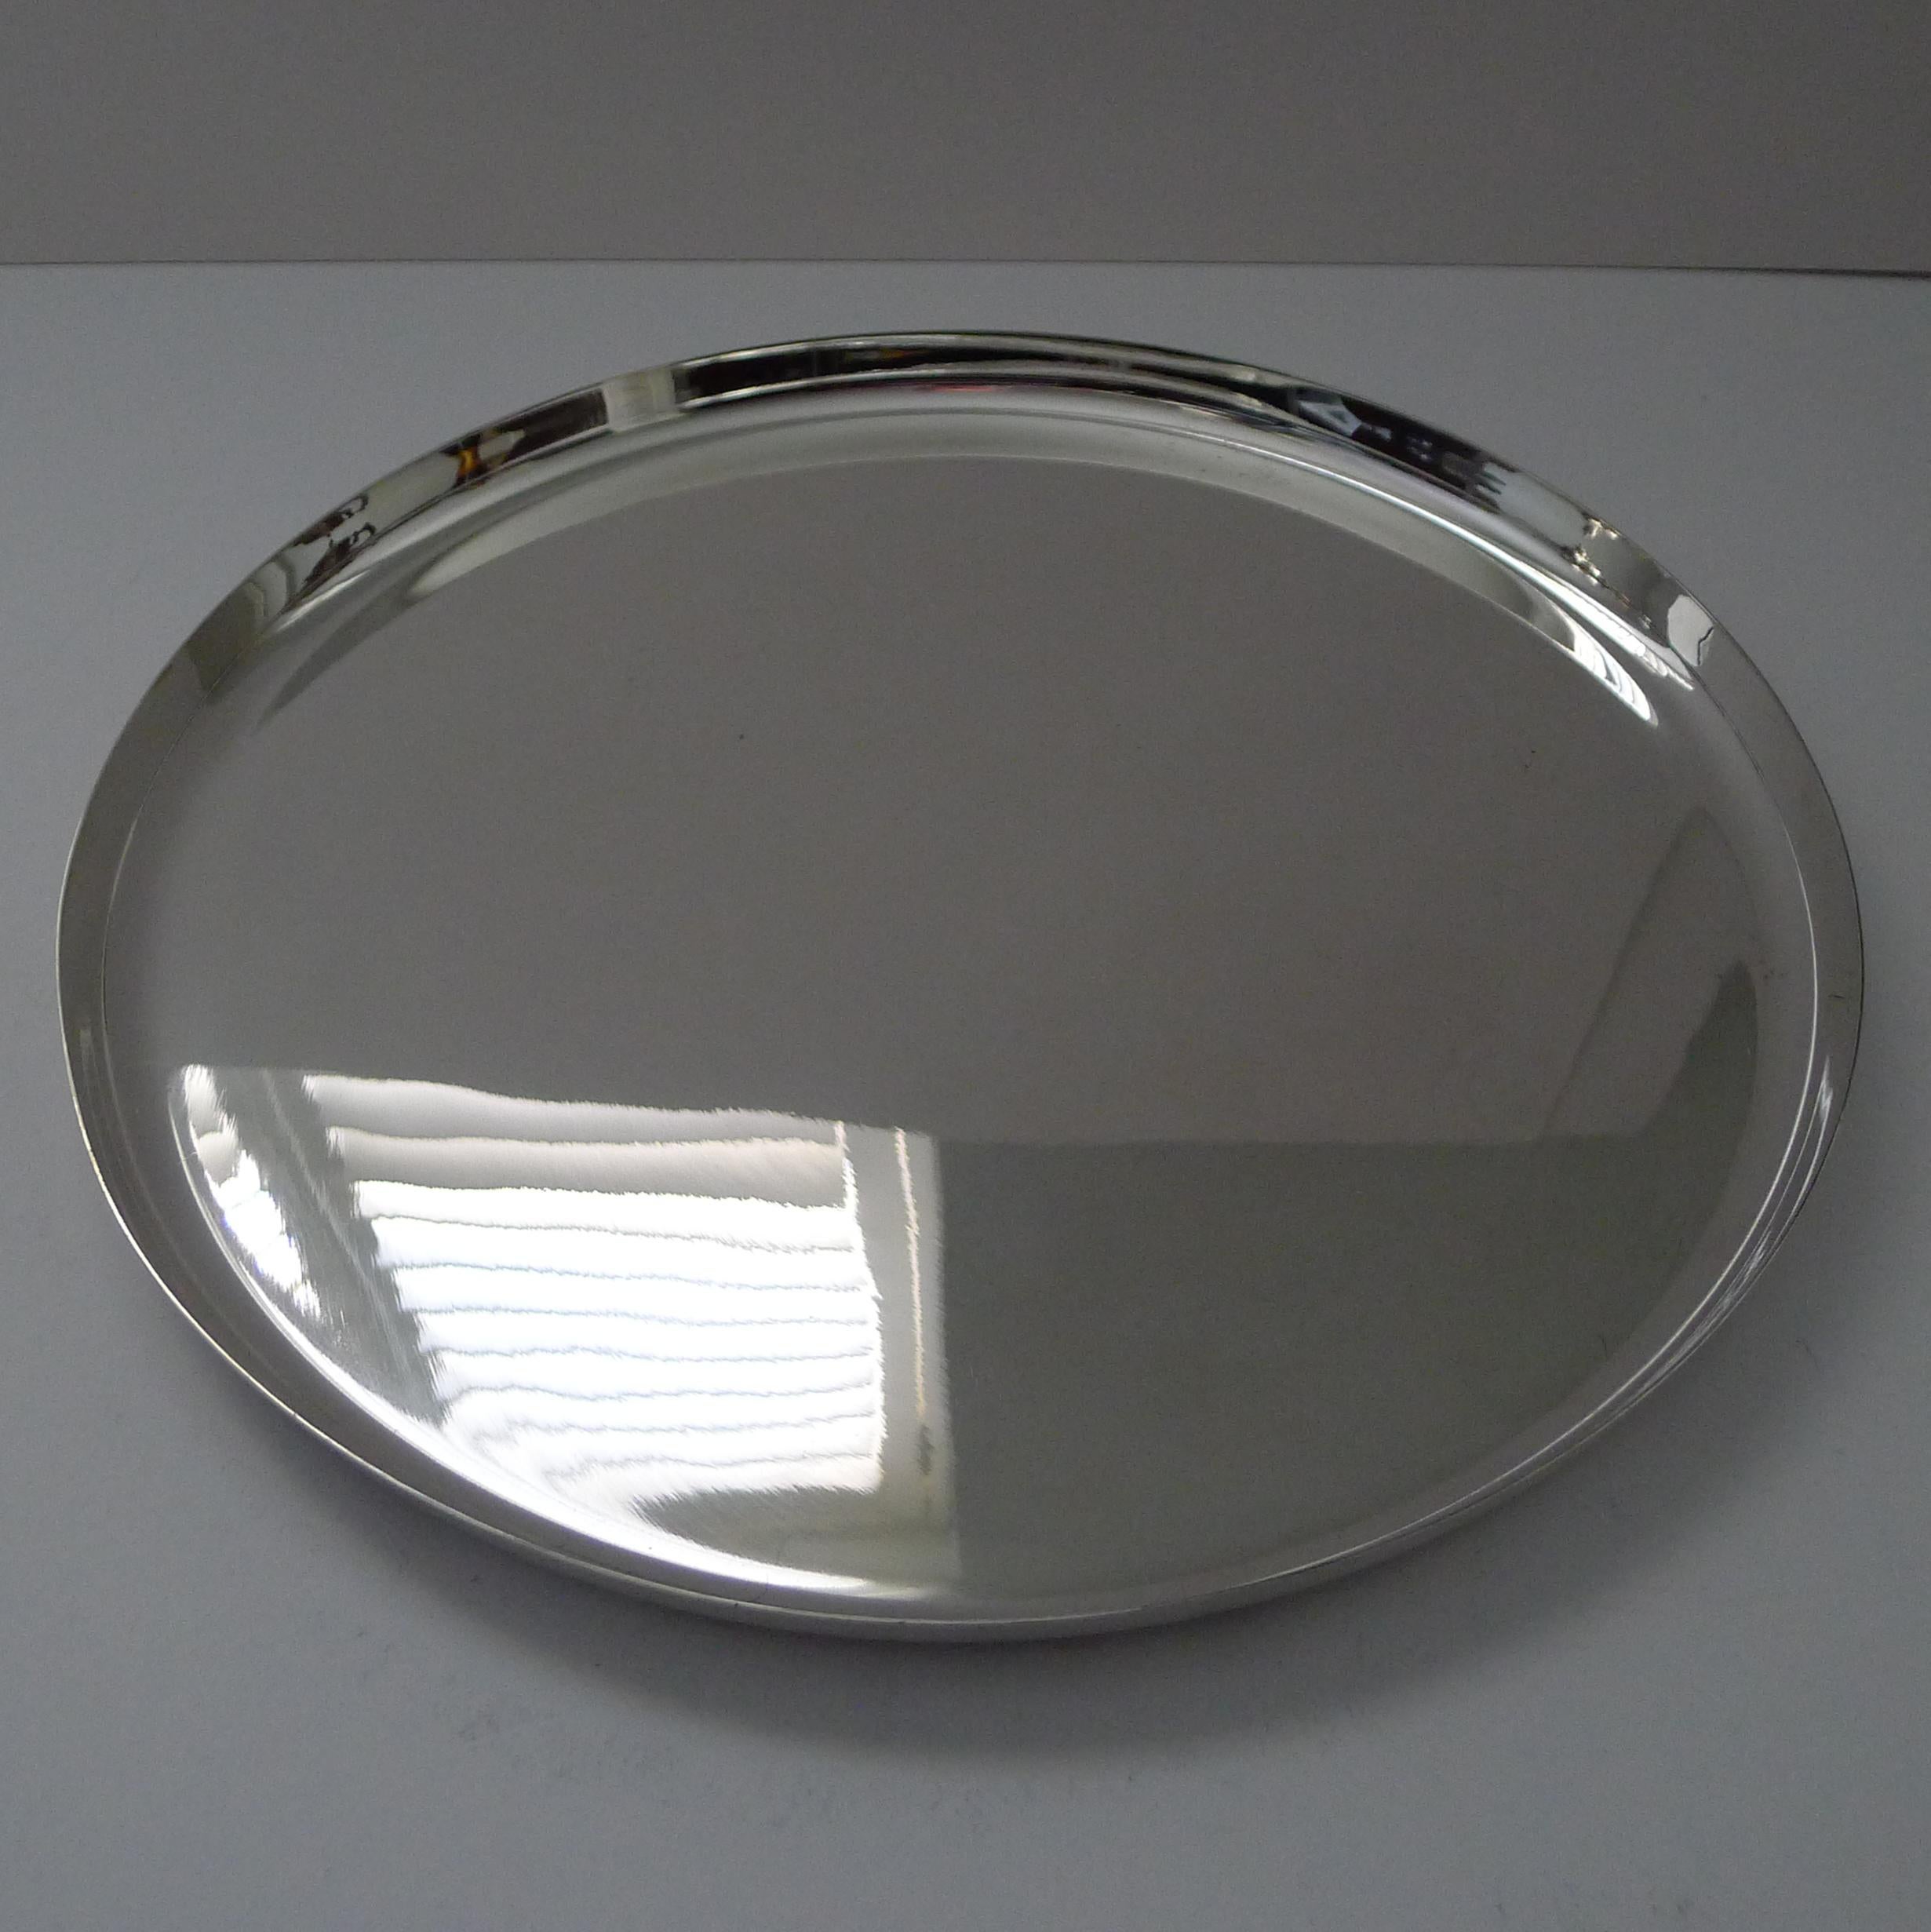 A stunning modernist circular cocktail tray designed by the world famous Lino Sabattini for famous Orfevrerie Christofle, a magical combination of quality and minimalist design.

Just back from our silversmith's workshop where it has been